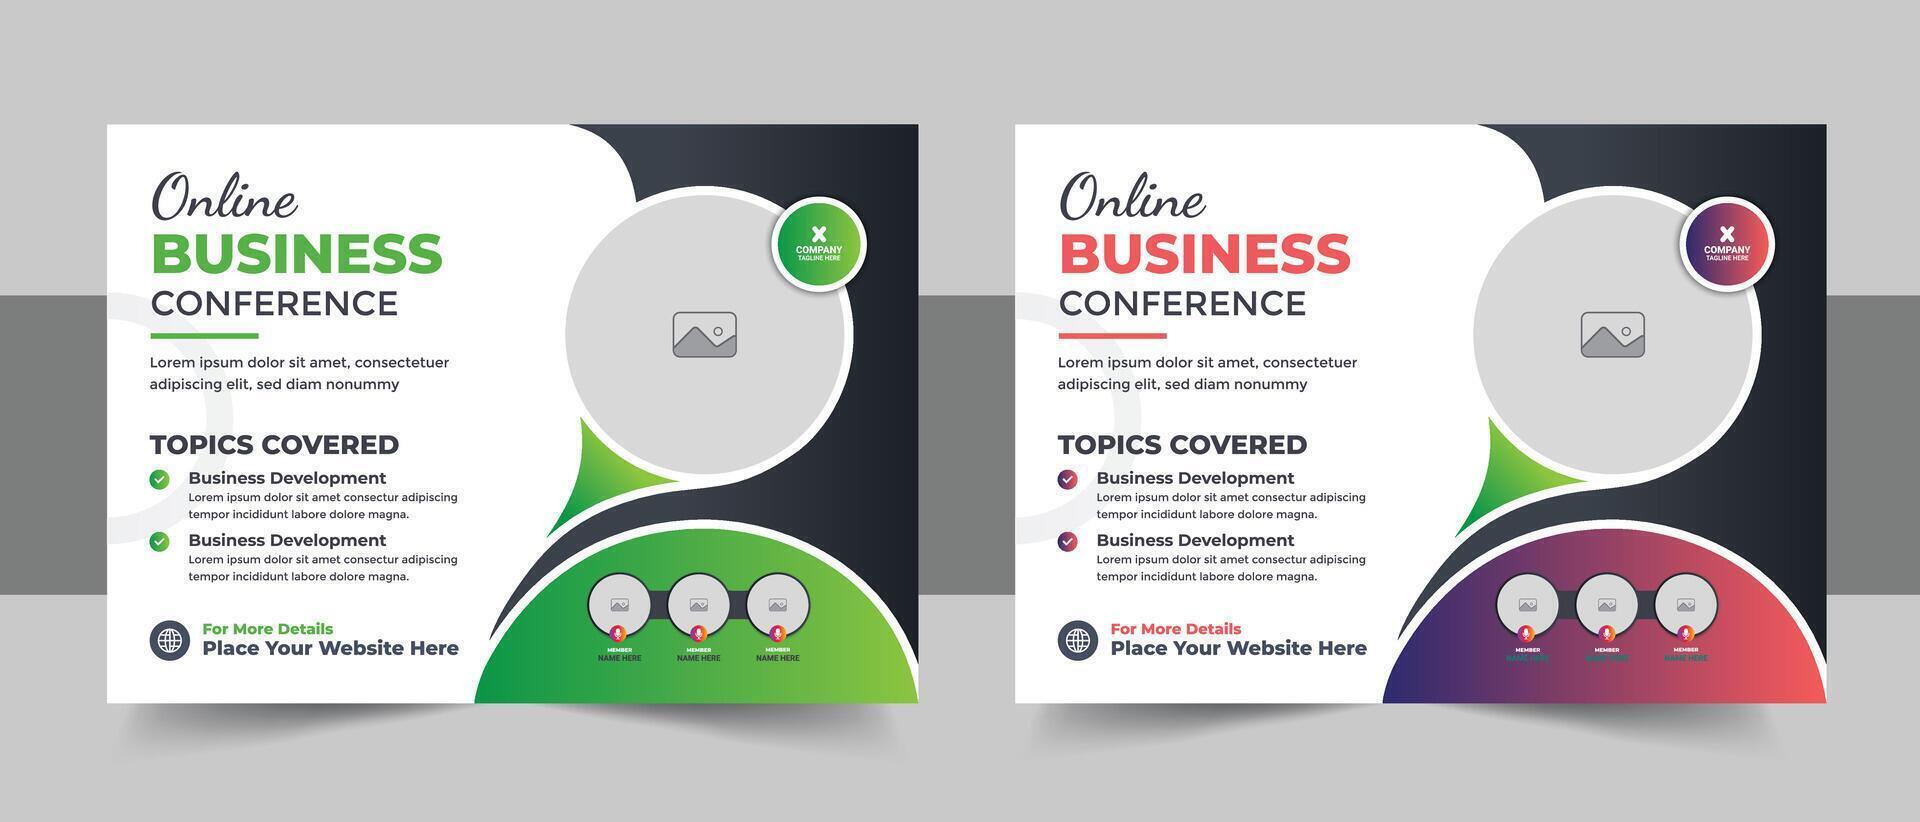 corporate horizontal business conference flyer template or business live webinar conference banner vector